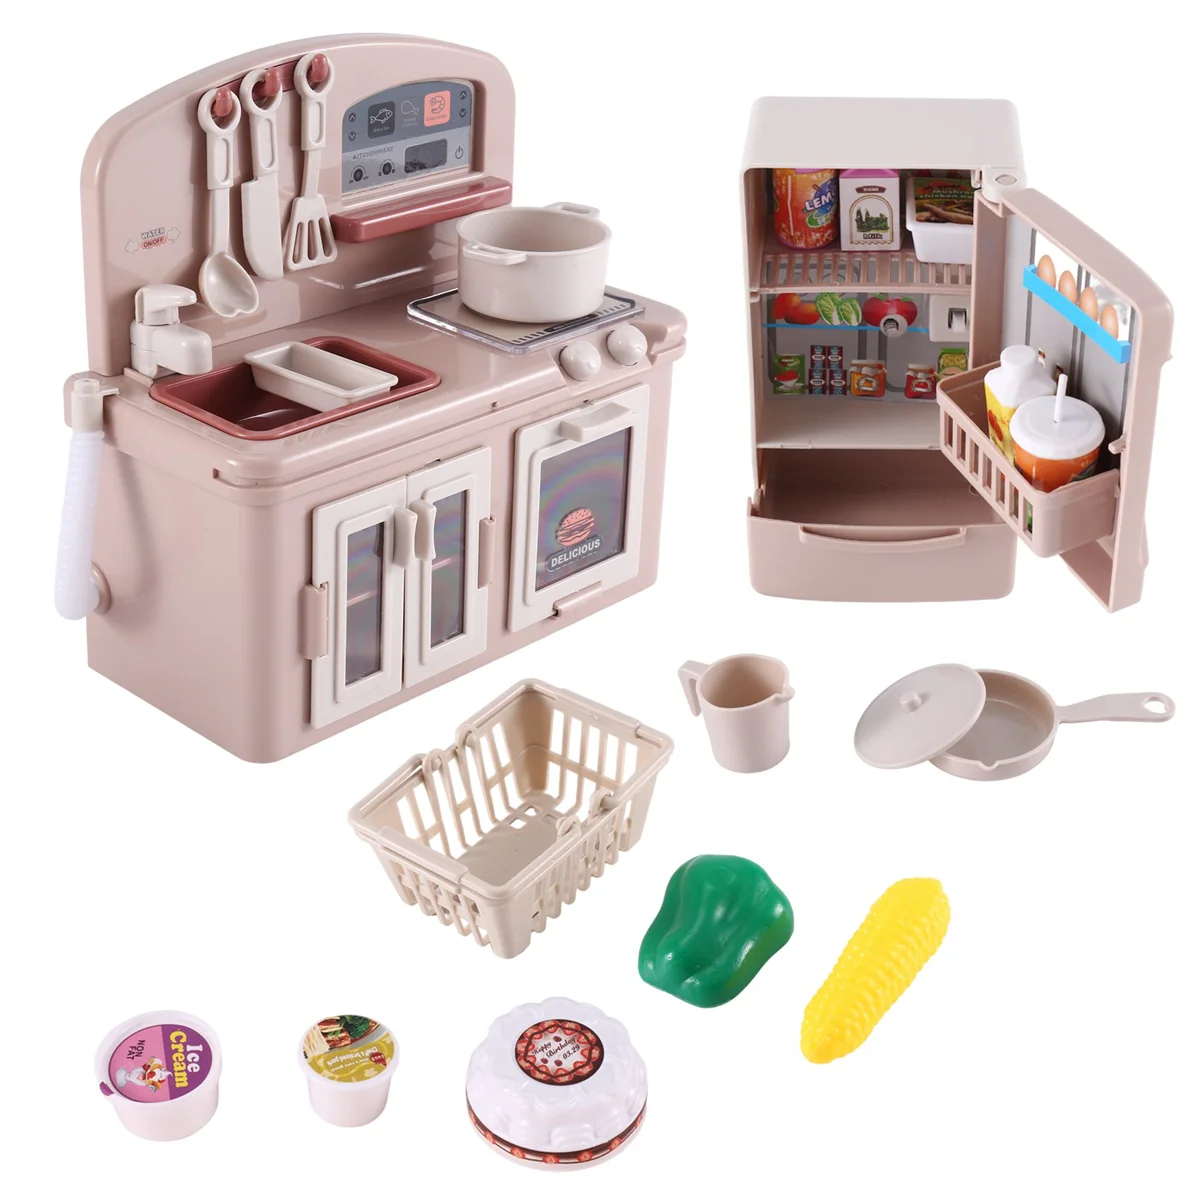 

YH189-1S Household Simulation Large Stove Refrigerator Children'S Small Home Appliances Kitchen Toys Boys and Girls Set